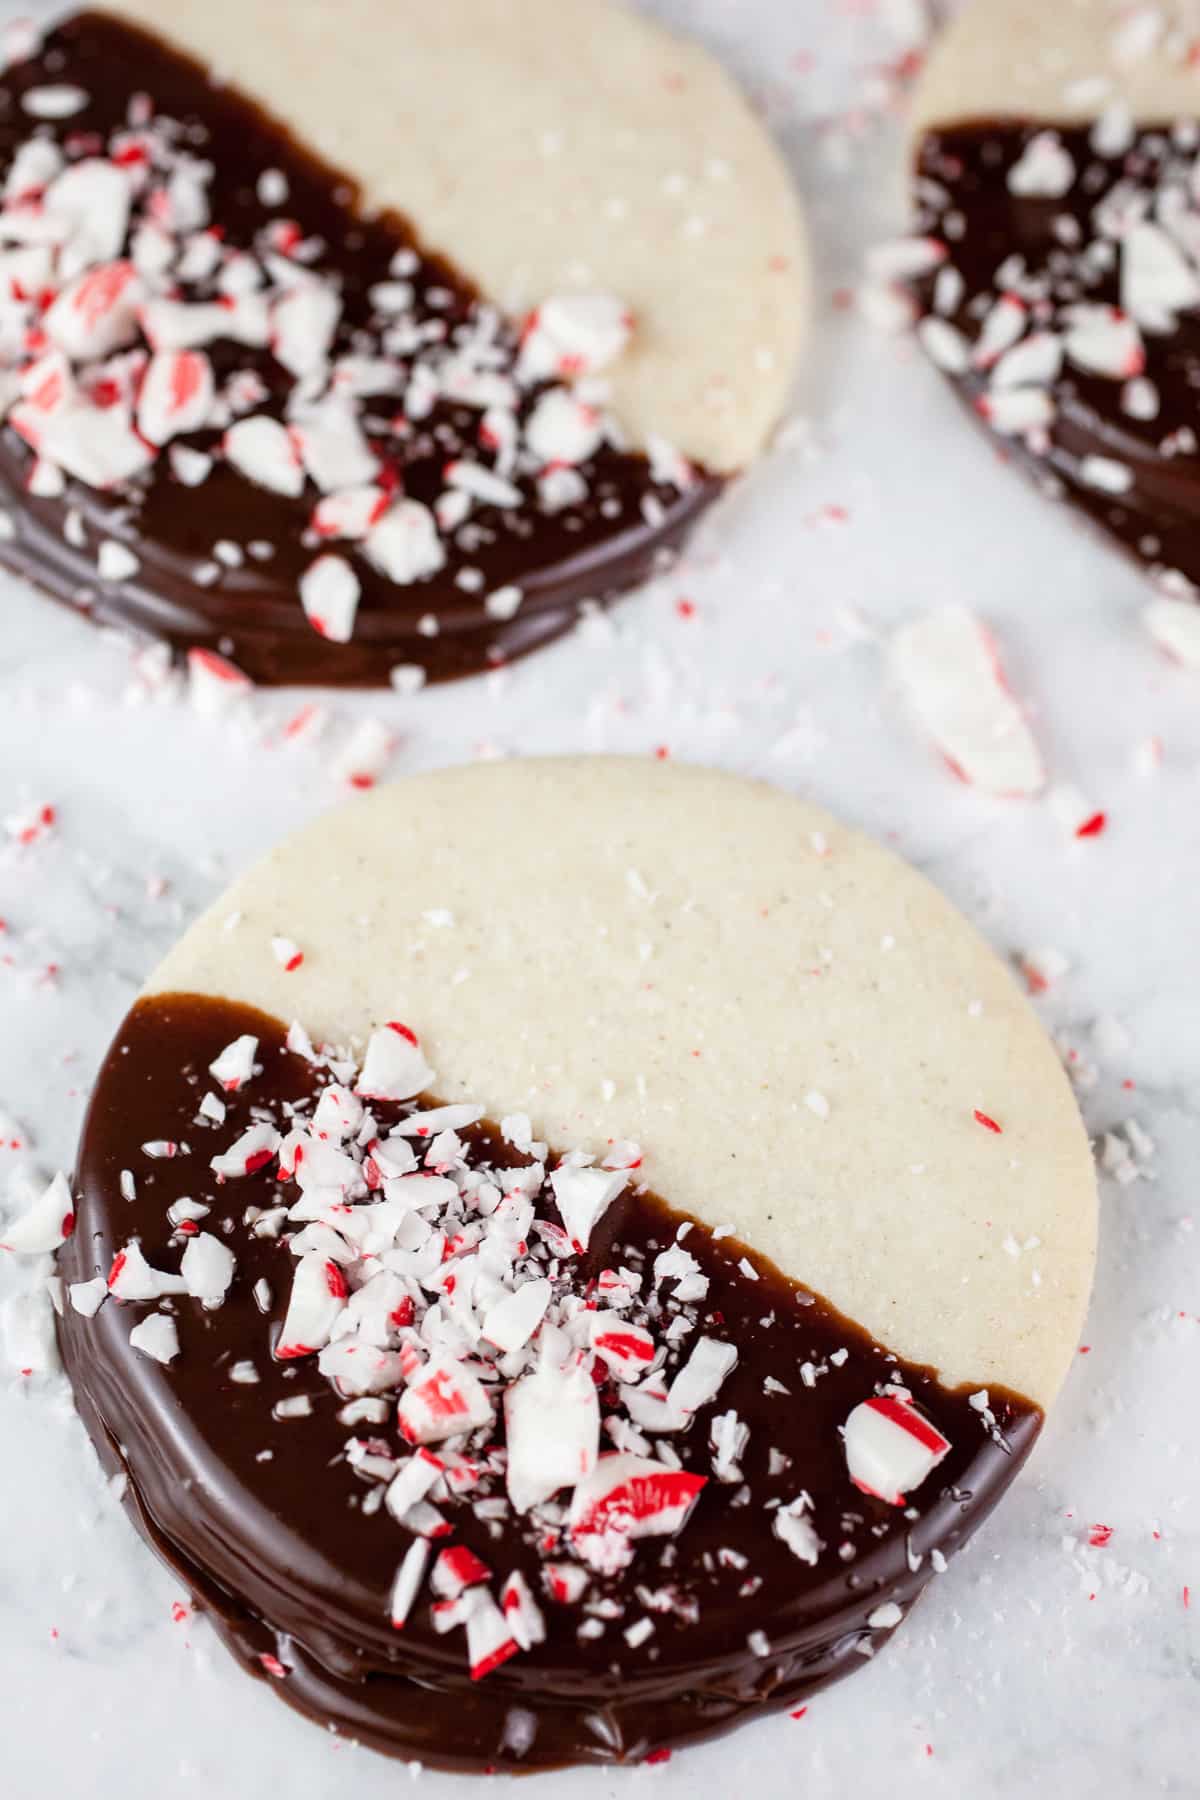 Peppermint shortbread cookies dipped in chocolate ganache and peppermint candies.